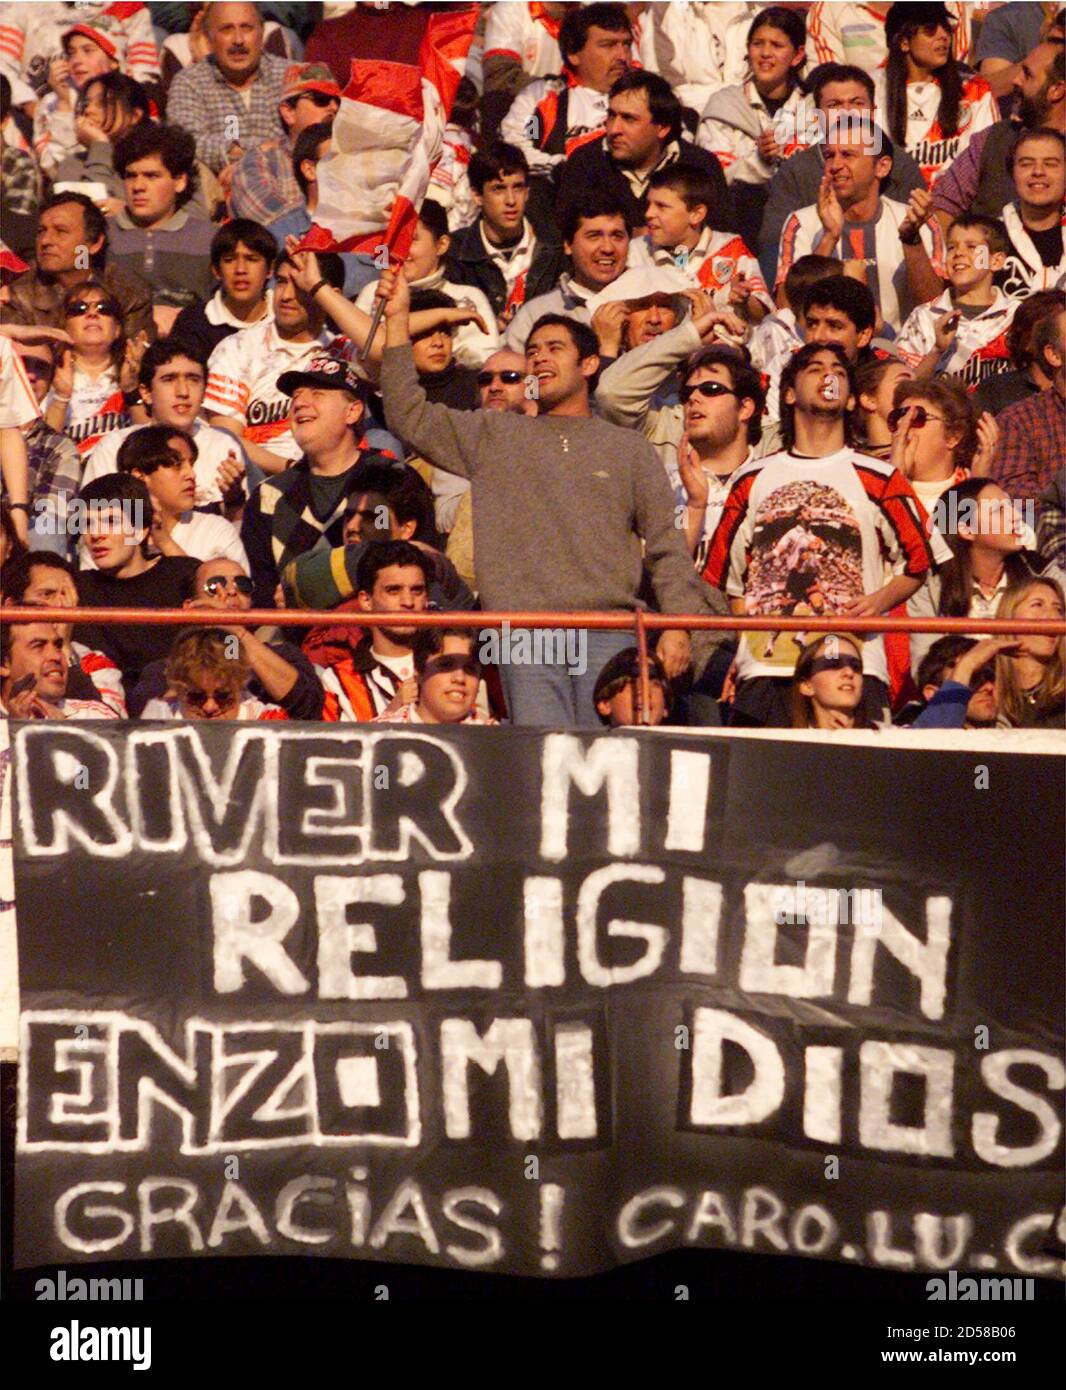 Fans Of The Last Idol Of Argentine Soccer Club River Plate Uruguayan Striker Enzo Francescoli Cheer In Front Of A Banner Saying My Religion Is River Plate Enzo Is My God During